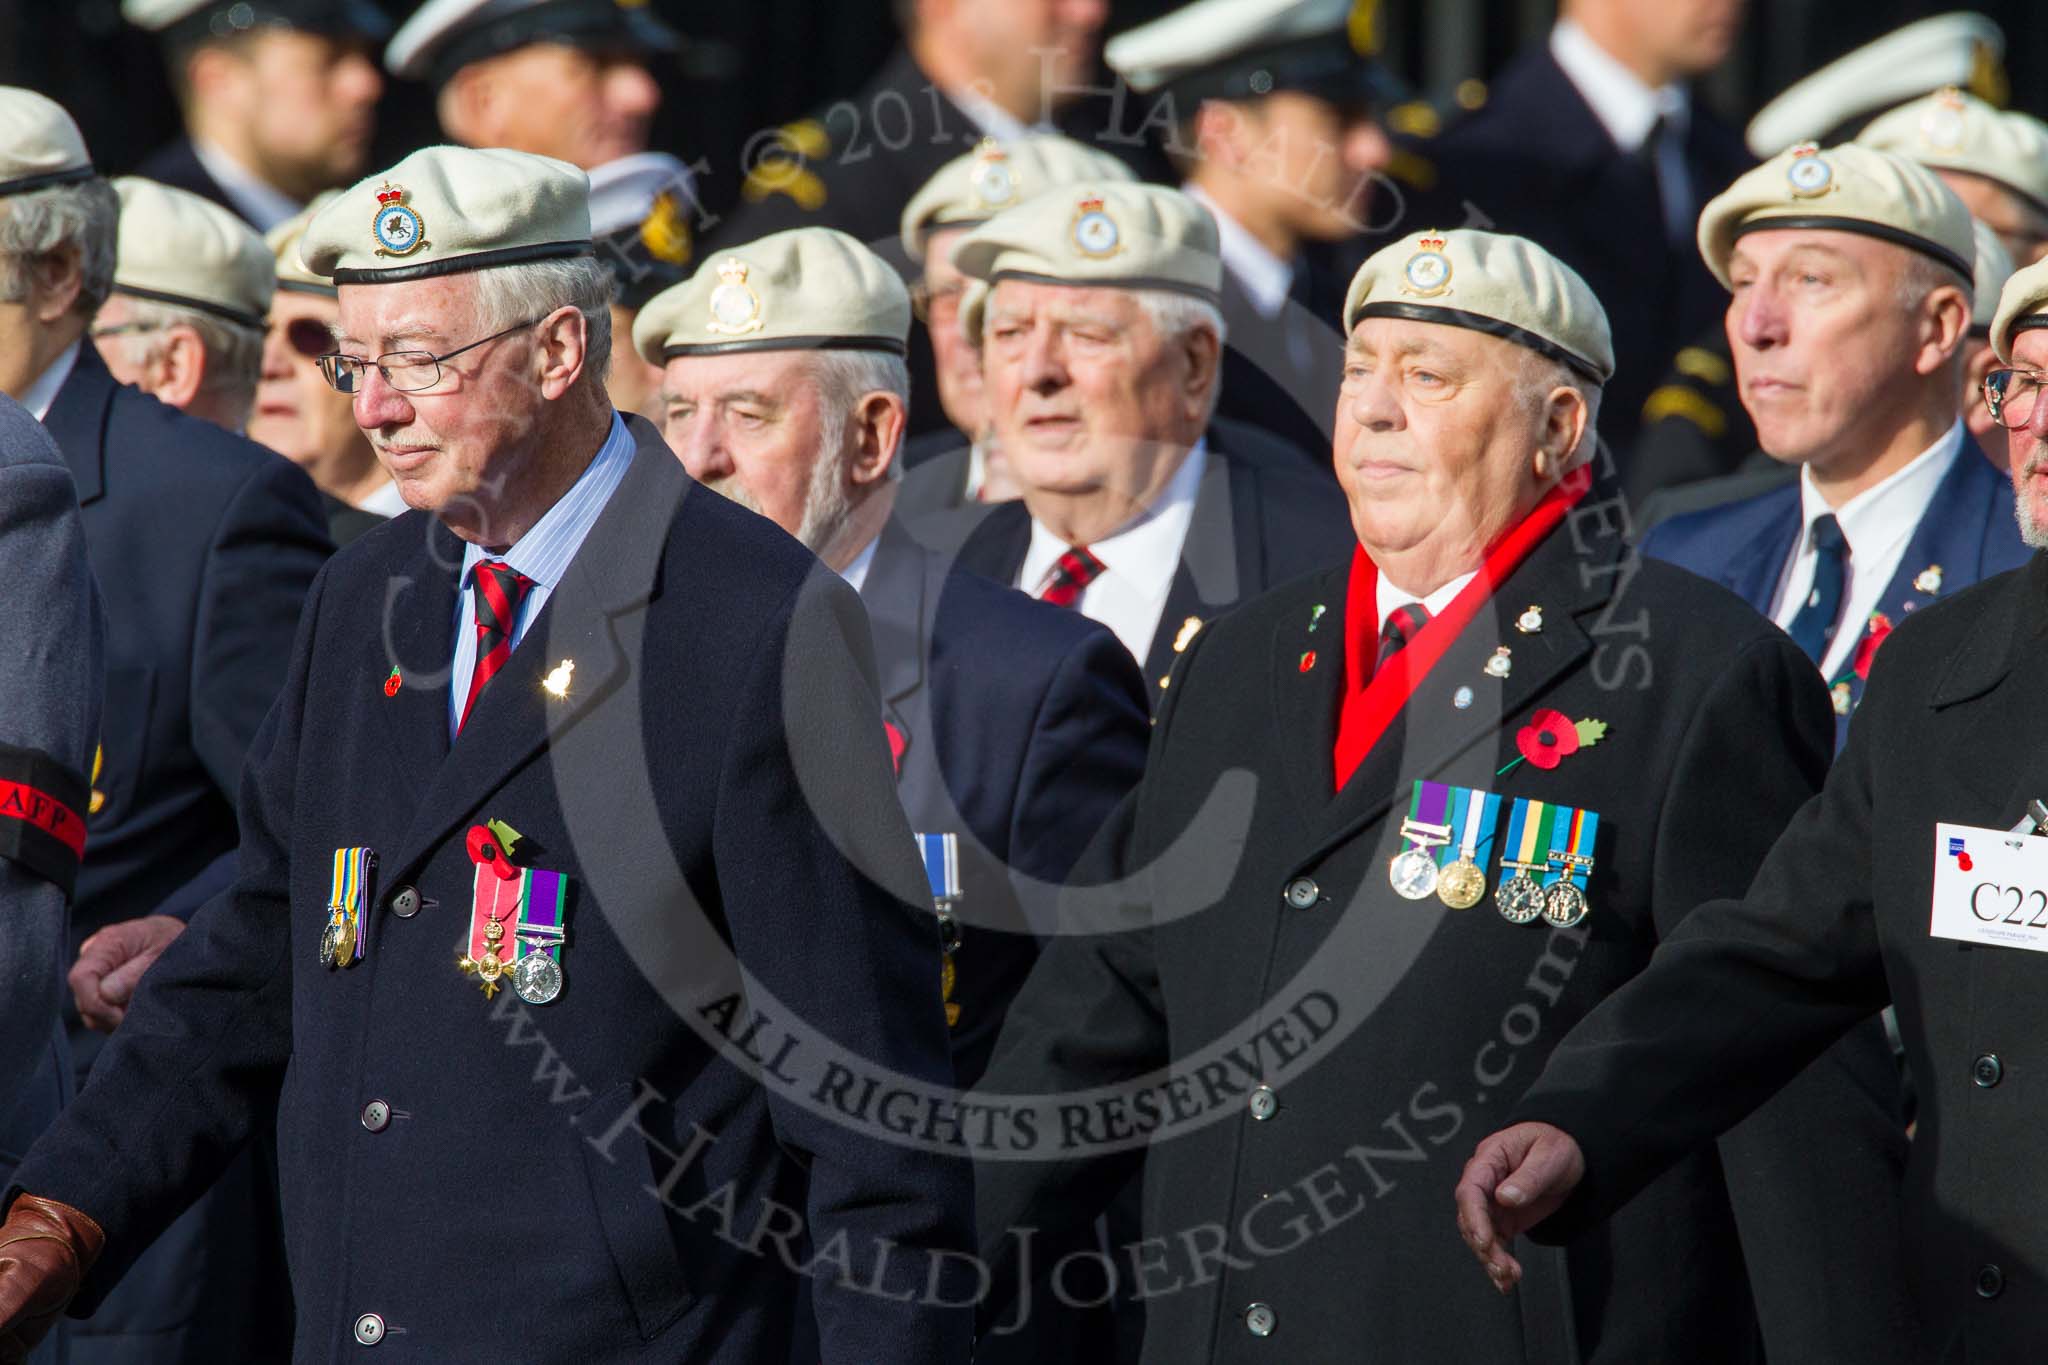 Remembrance Sunday at the Cenotaph in London 2014: Group C22 - Royal Air Force Police Association.
Press stand opposite the Foreign Office building, Whitehall, London SW1,
London,
Greater London,
United Kingdom,
on 09 November 2014 at 11:41, image #185